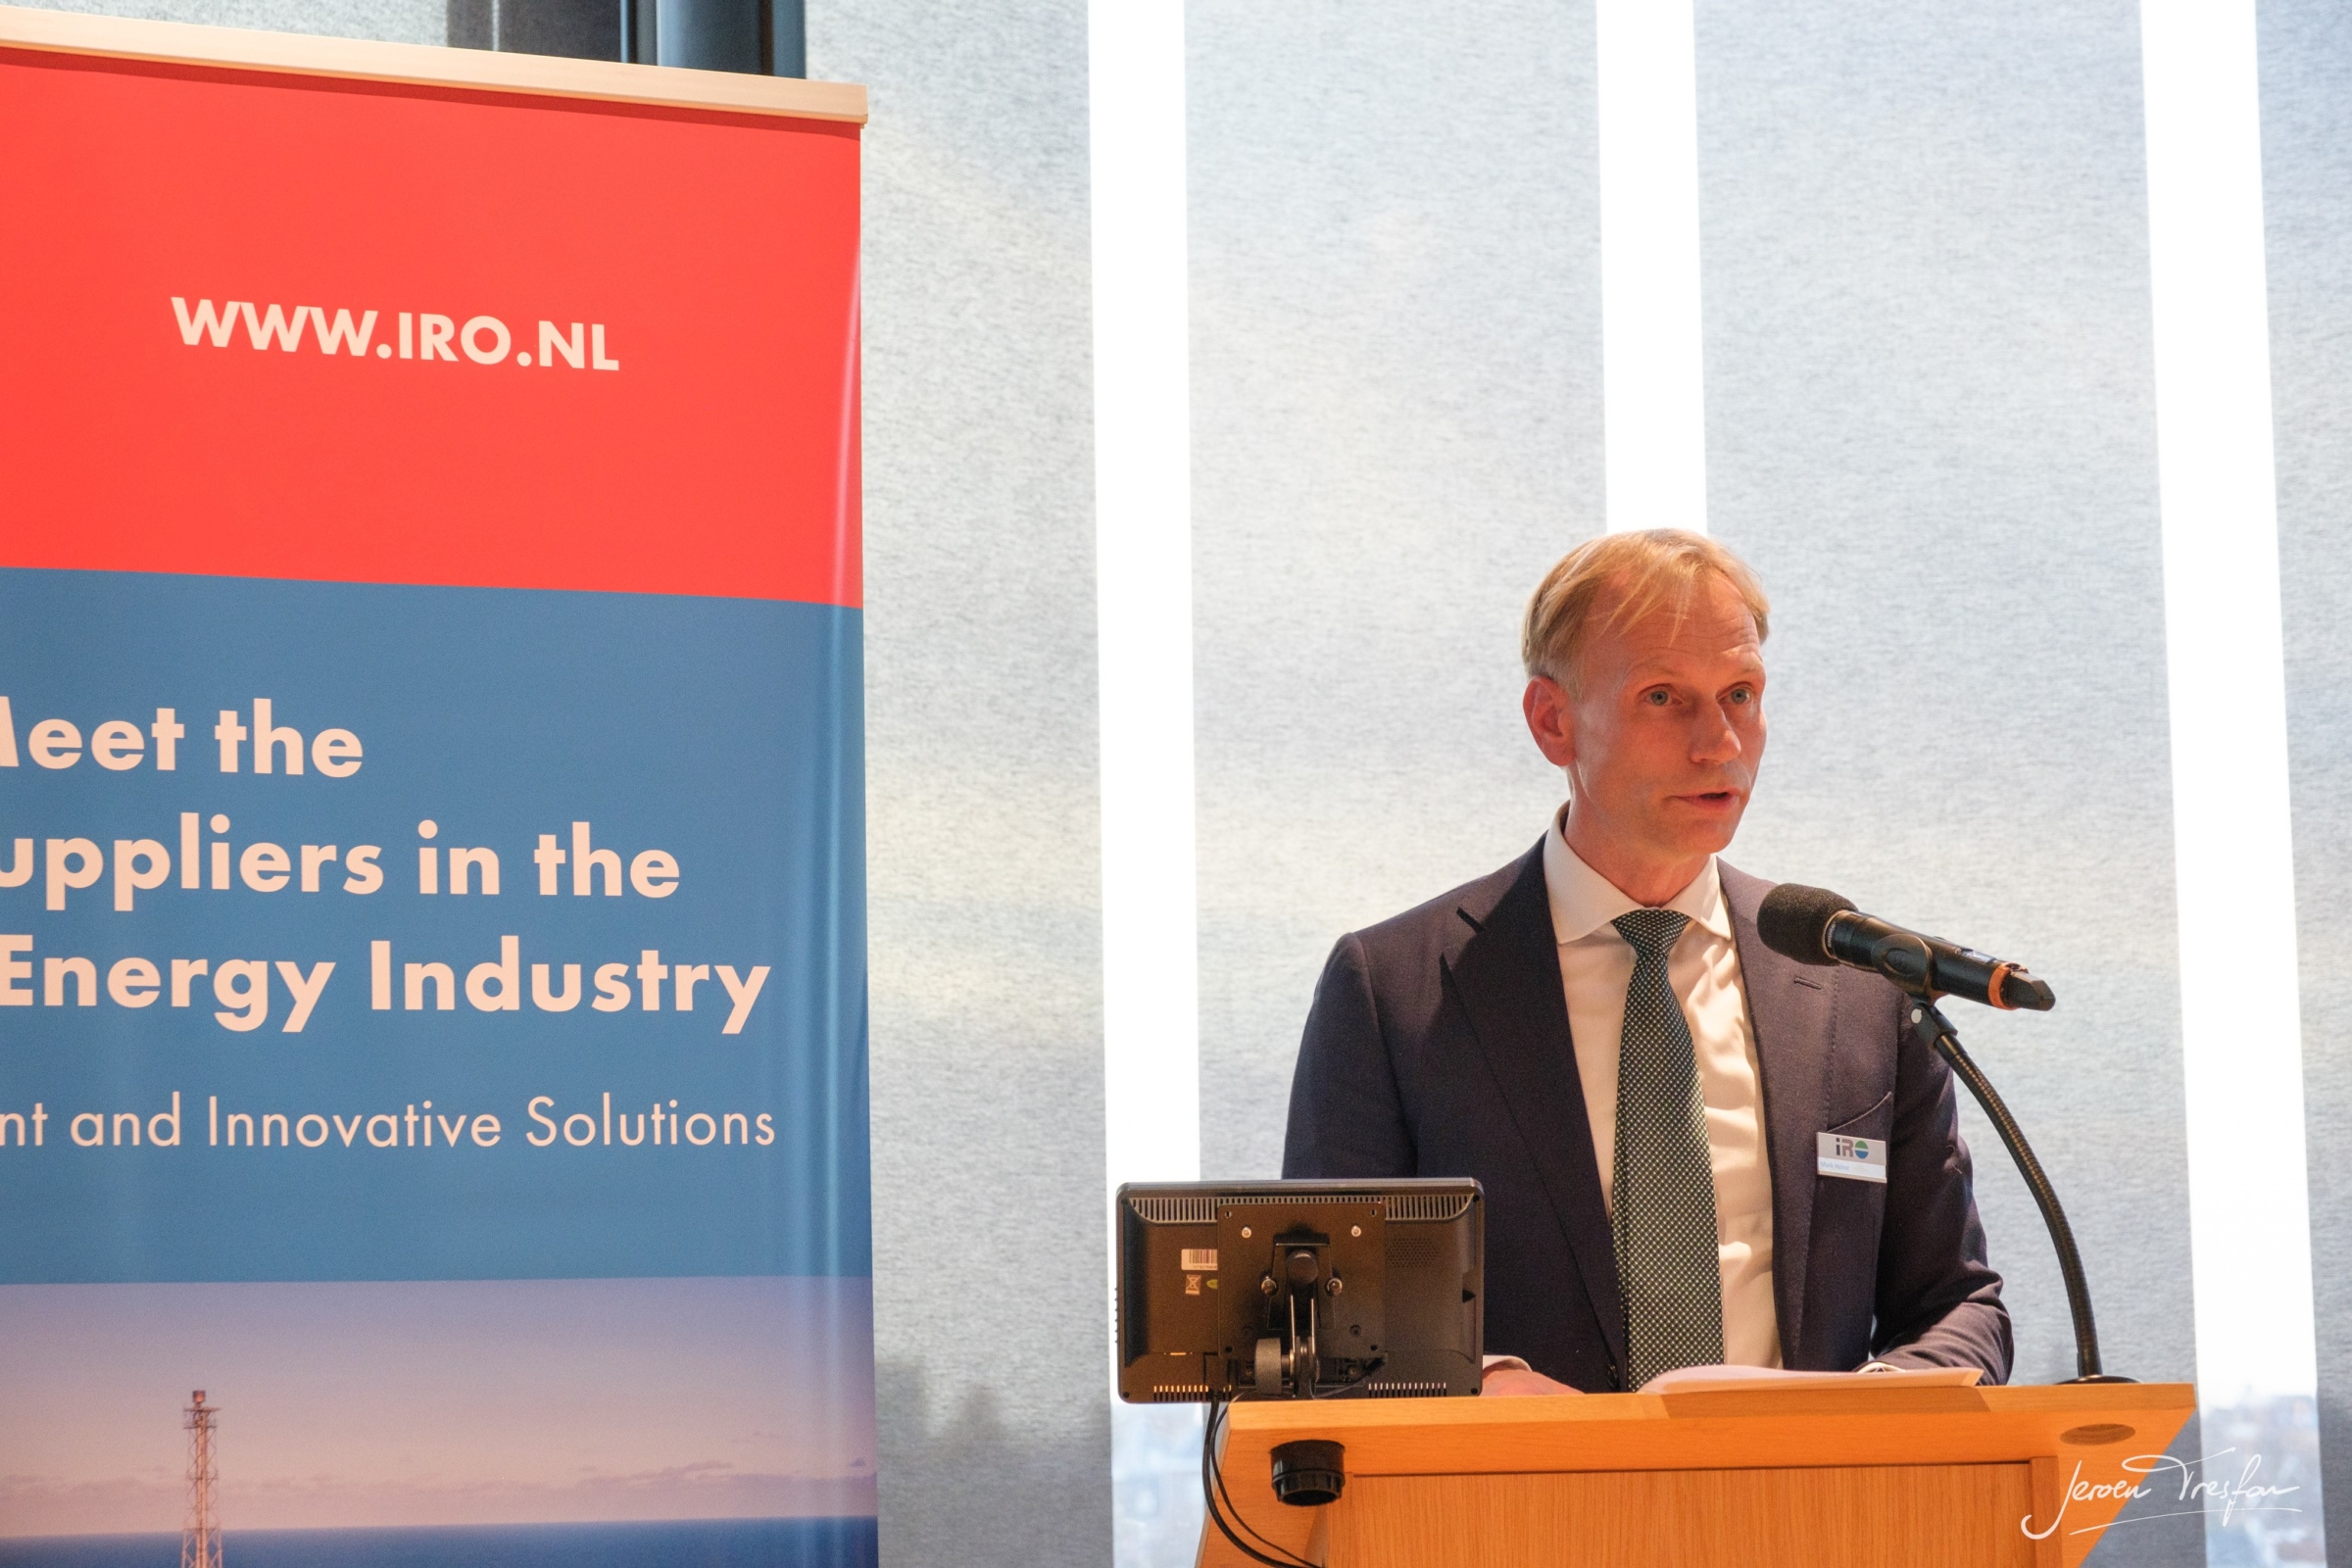 IRO chairman Mark Heine: IRO members are in an excellent position to fully respond to the energy transition with innovation and entrepreneurship